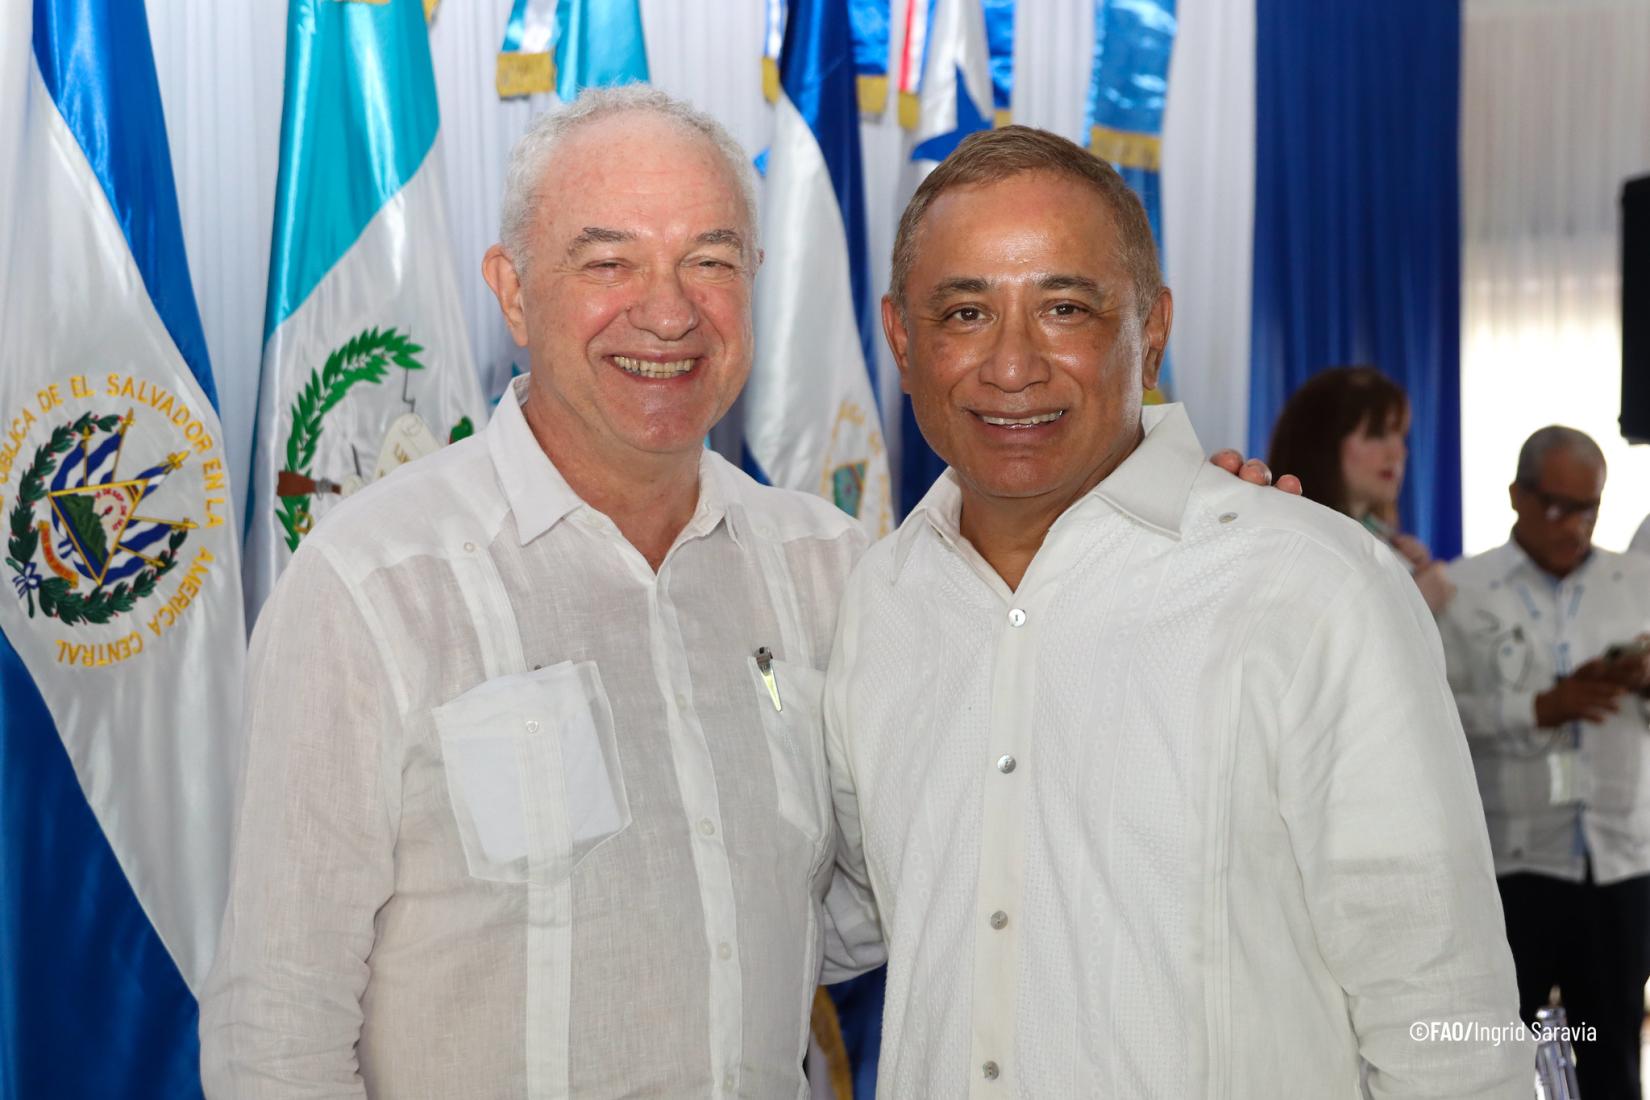 Mario Lubetkin, FAO Assistant Director-General and Regional Representative for Latin America and the Caribbean together with John Briceño, Prime Minister of Belize 